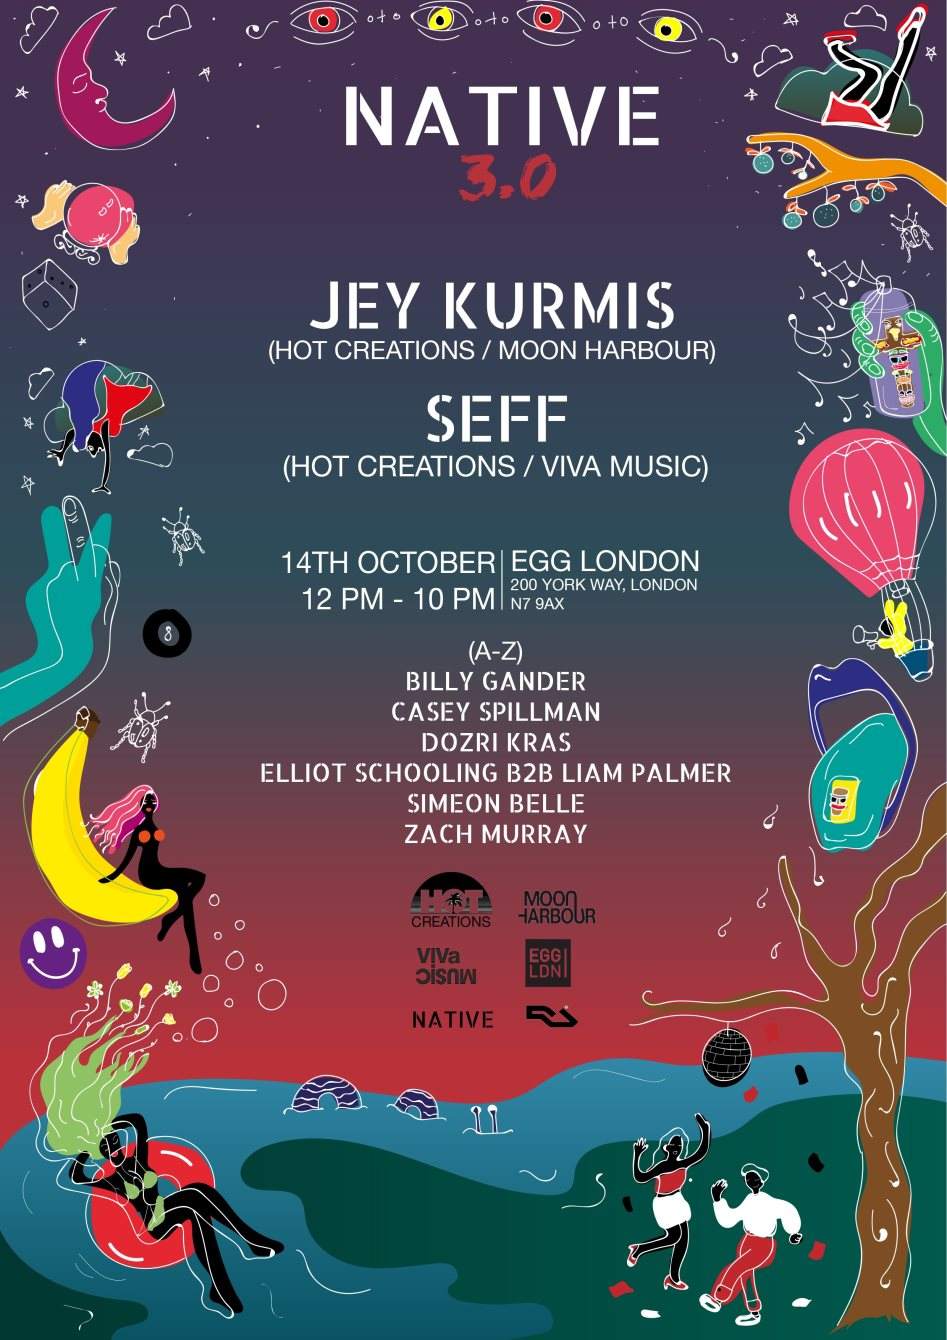 Native 3.0 with Jey Kurmis, SEFF & Residents (Day Party) - フライヤー表